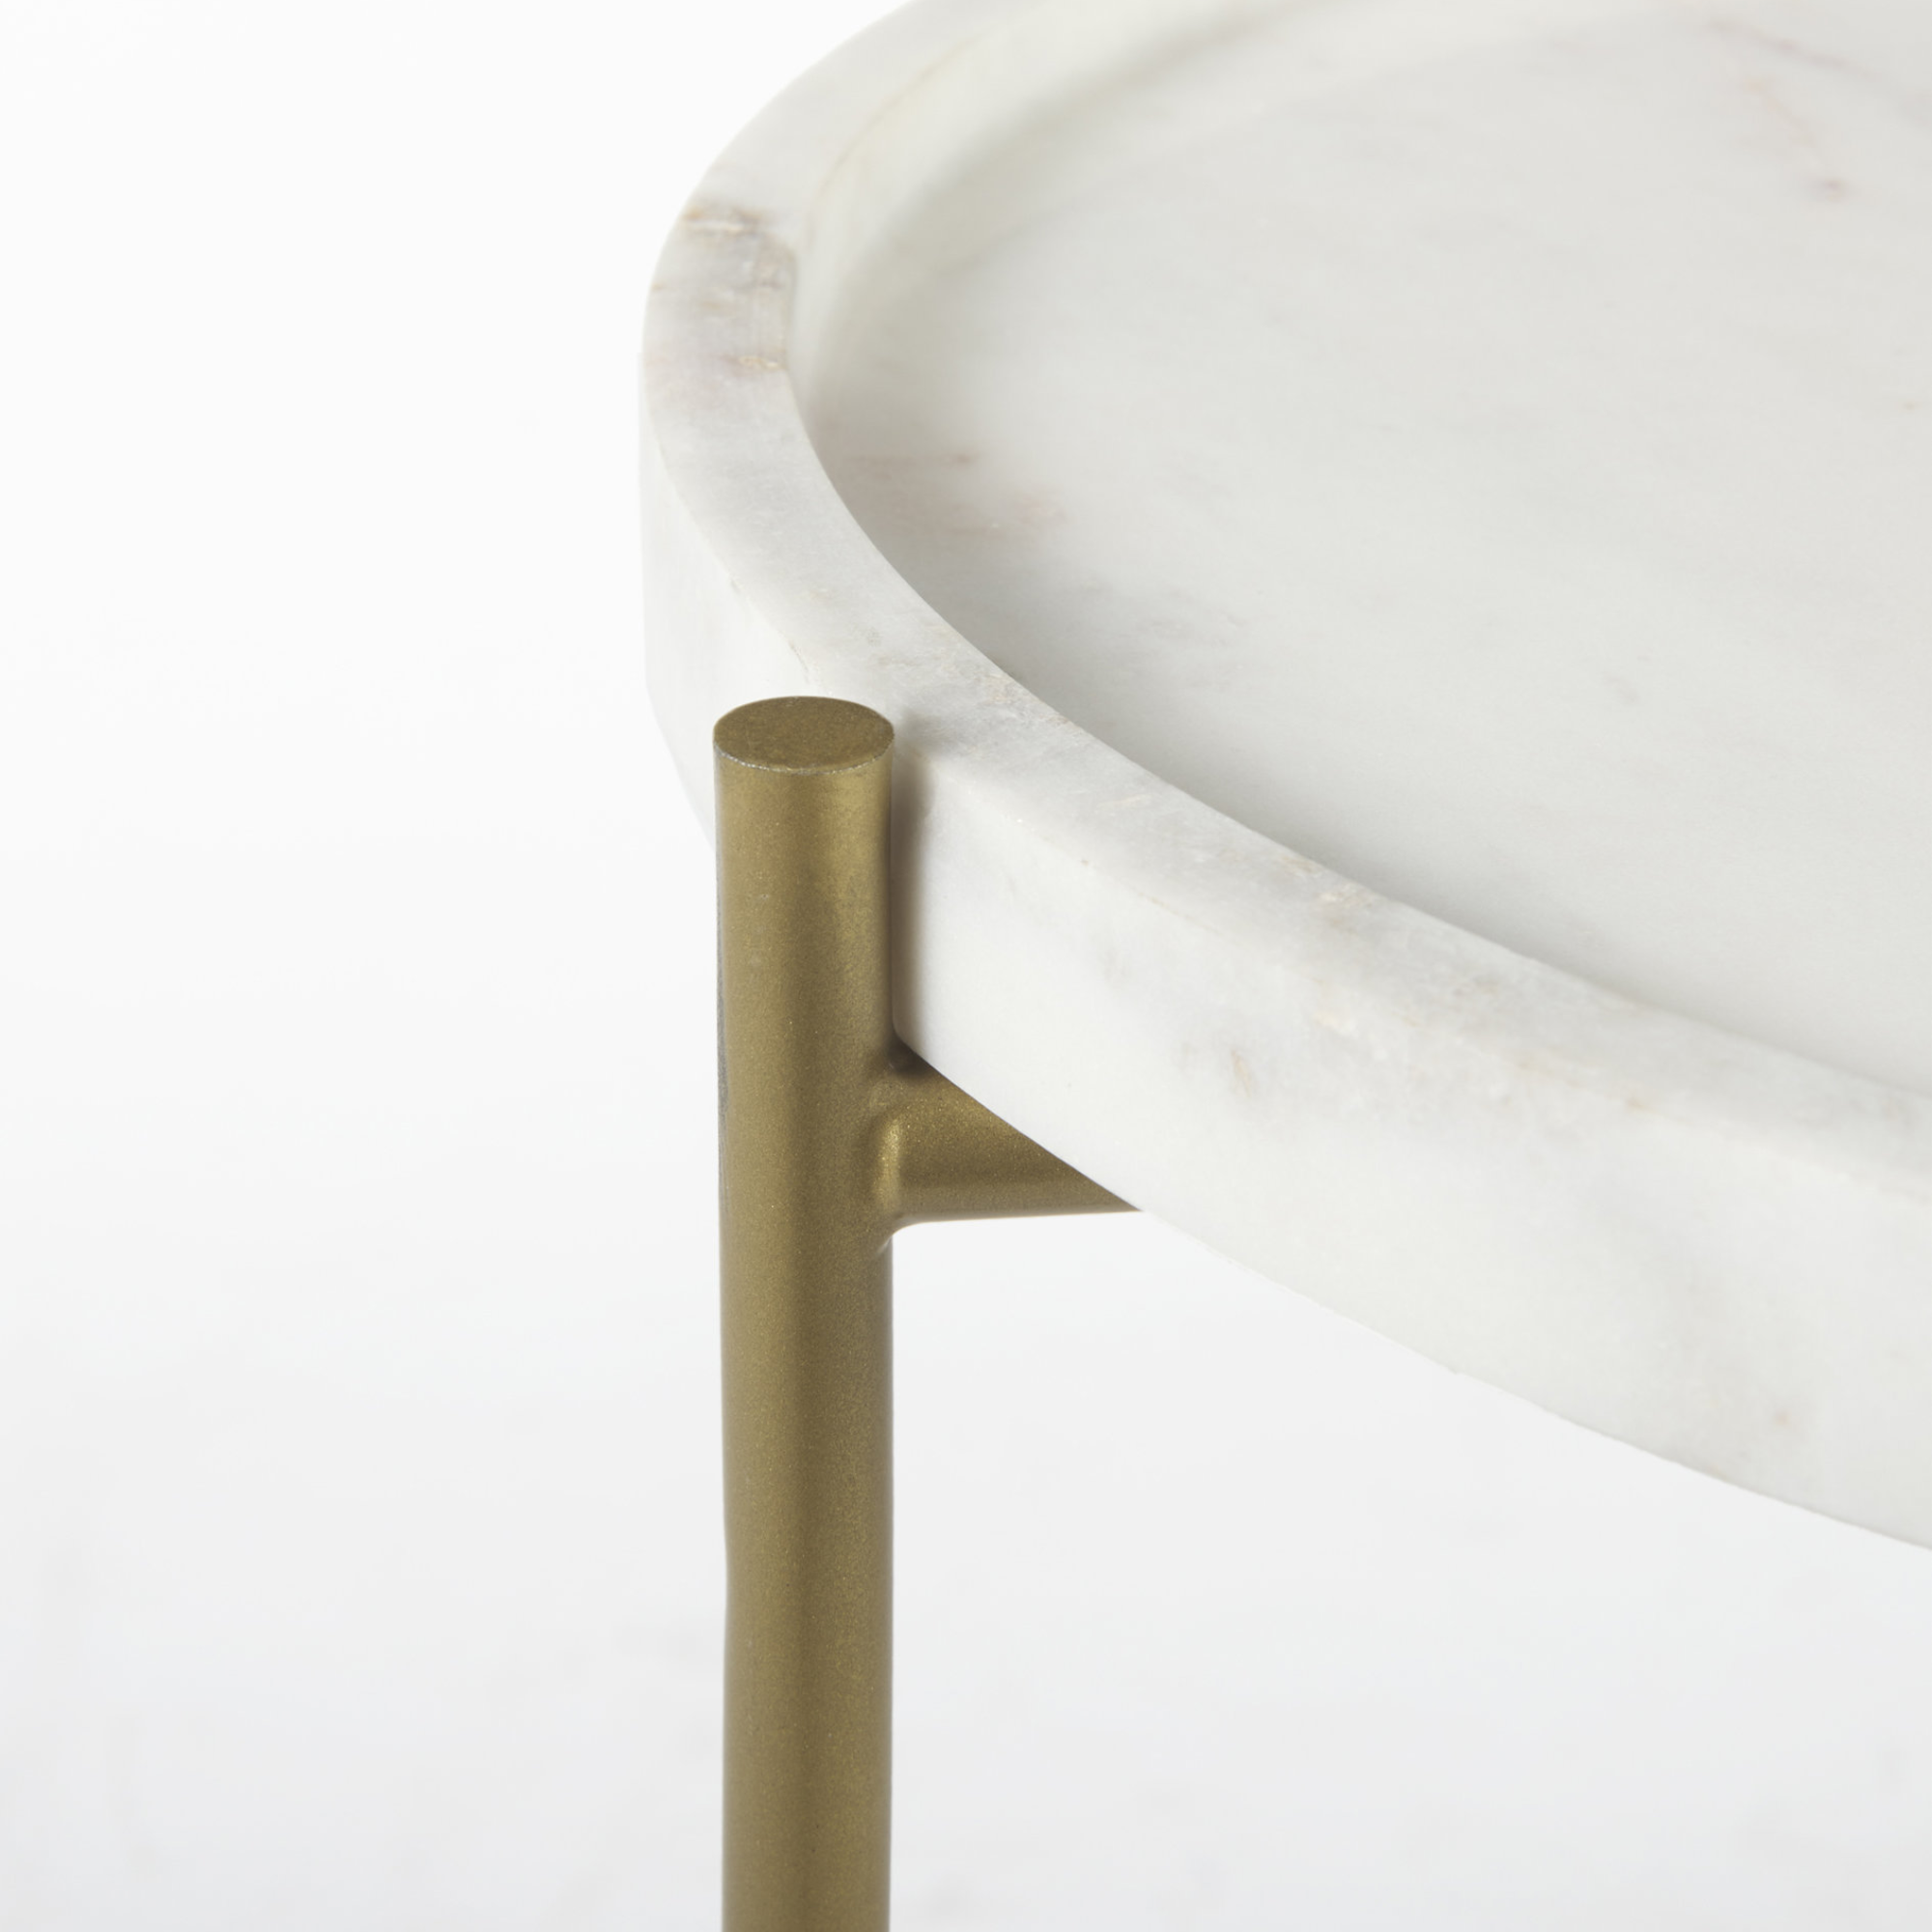 Stella Accent Table - White Marble